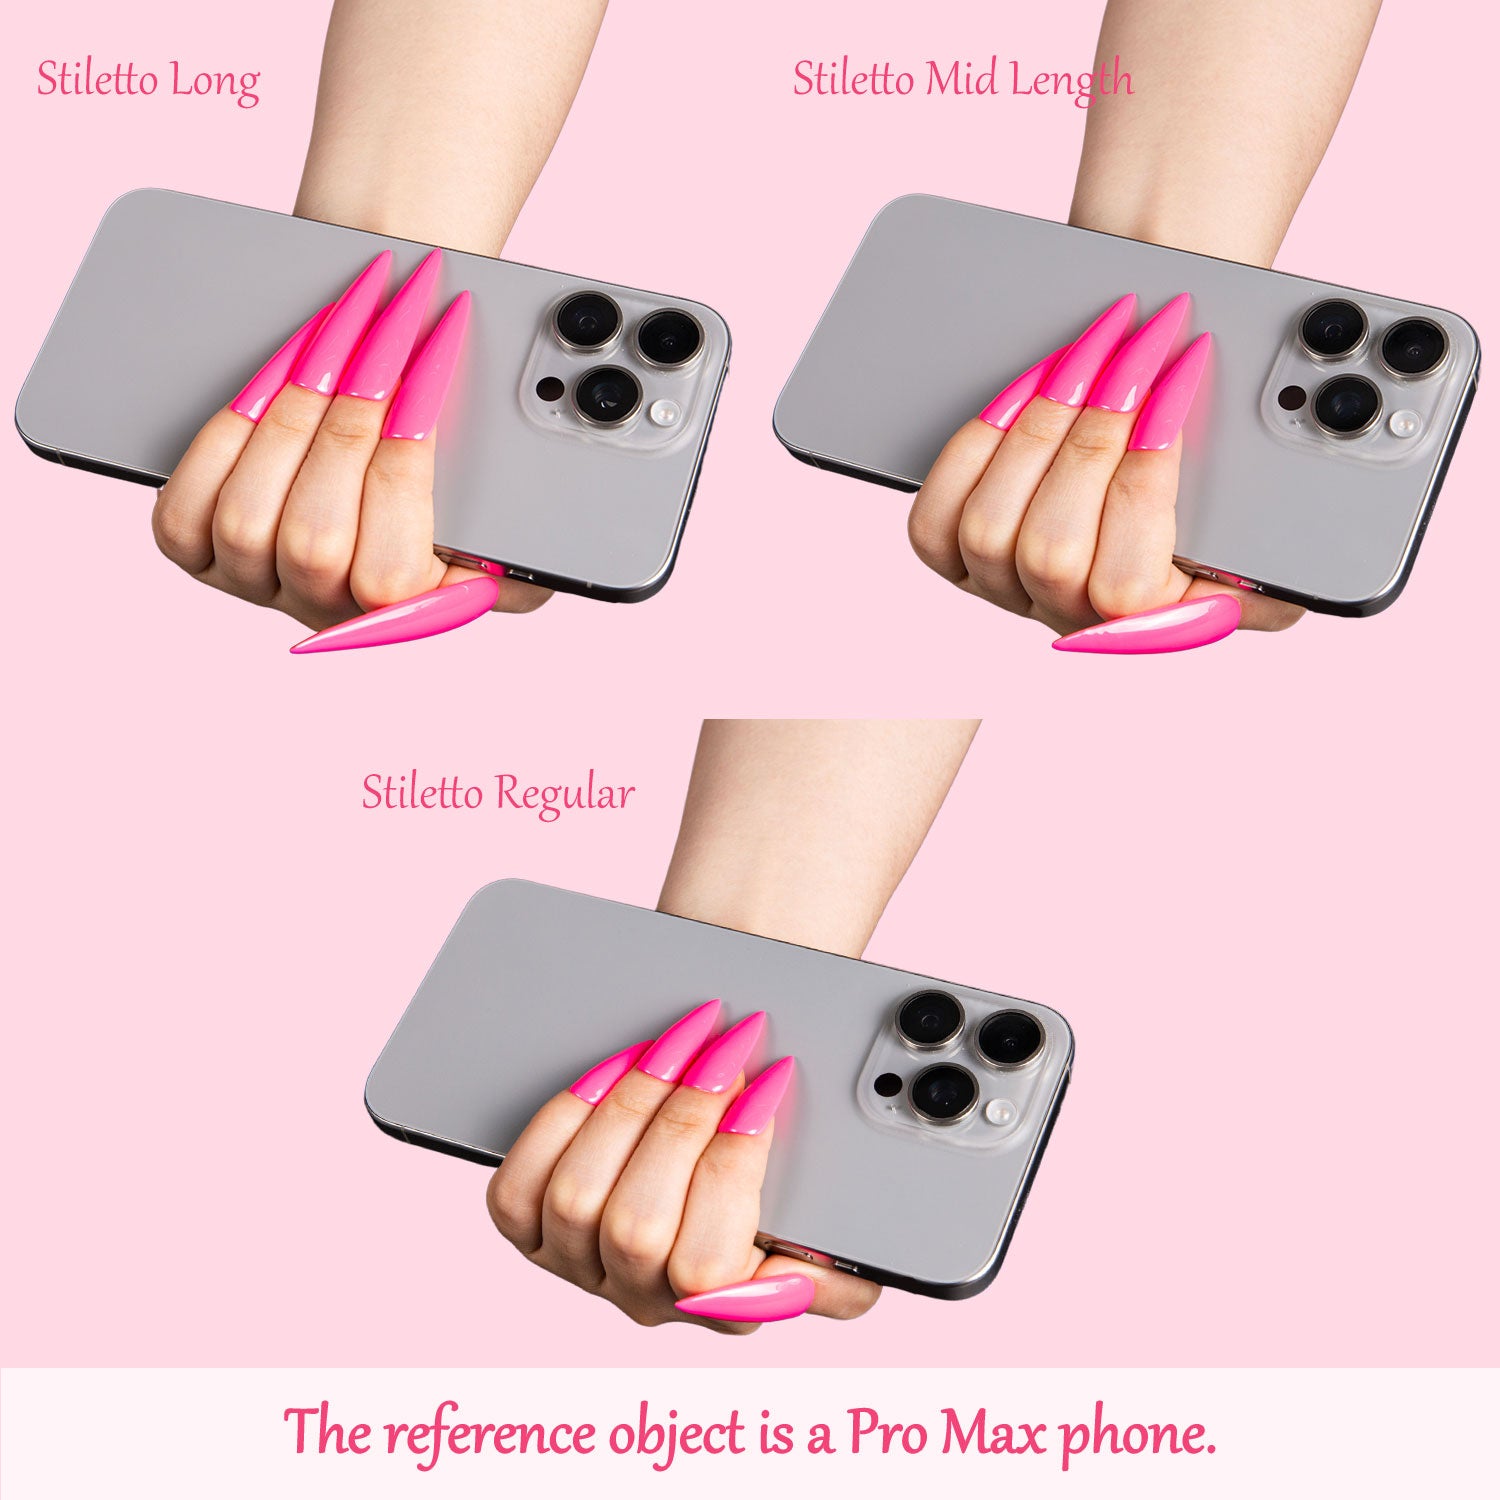 Three sets of bright hot pink press-on nails in stiletto shapes varying in length: long, mid-length, and regular, demonstrated by hands holding a Pro Max phone for size reference.